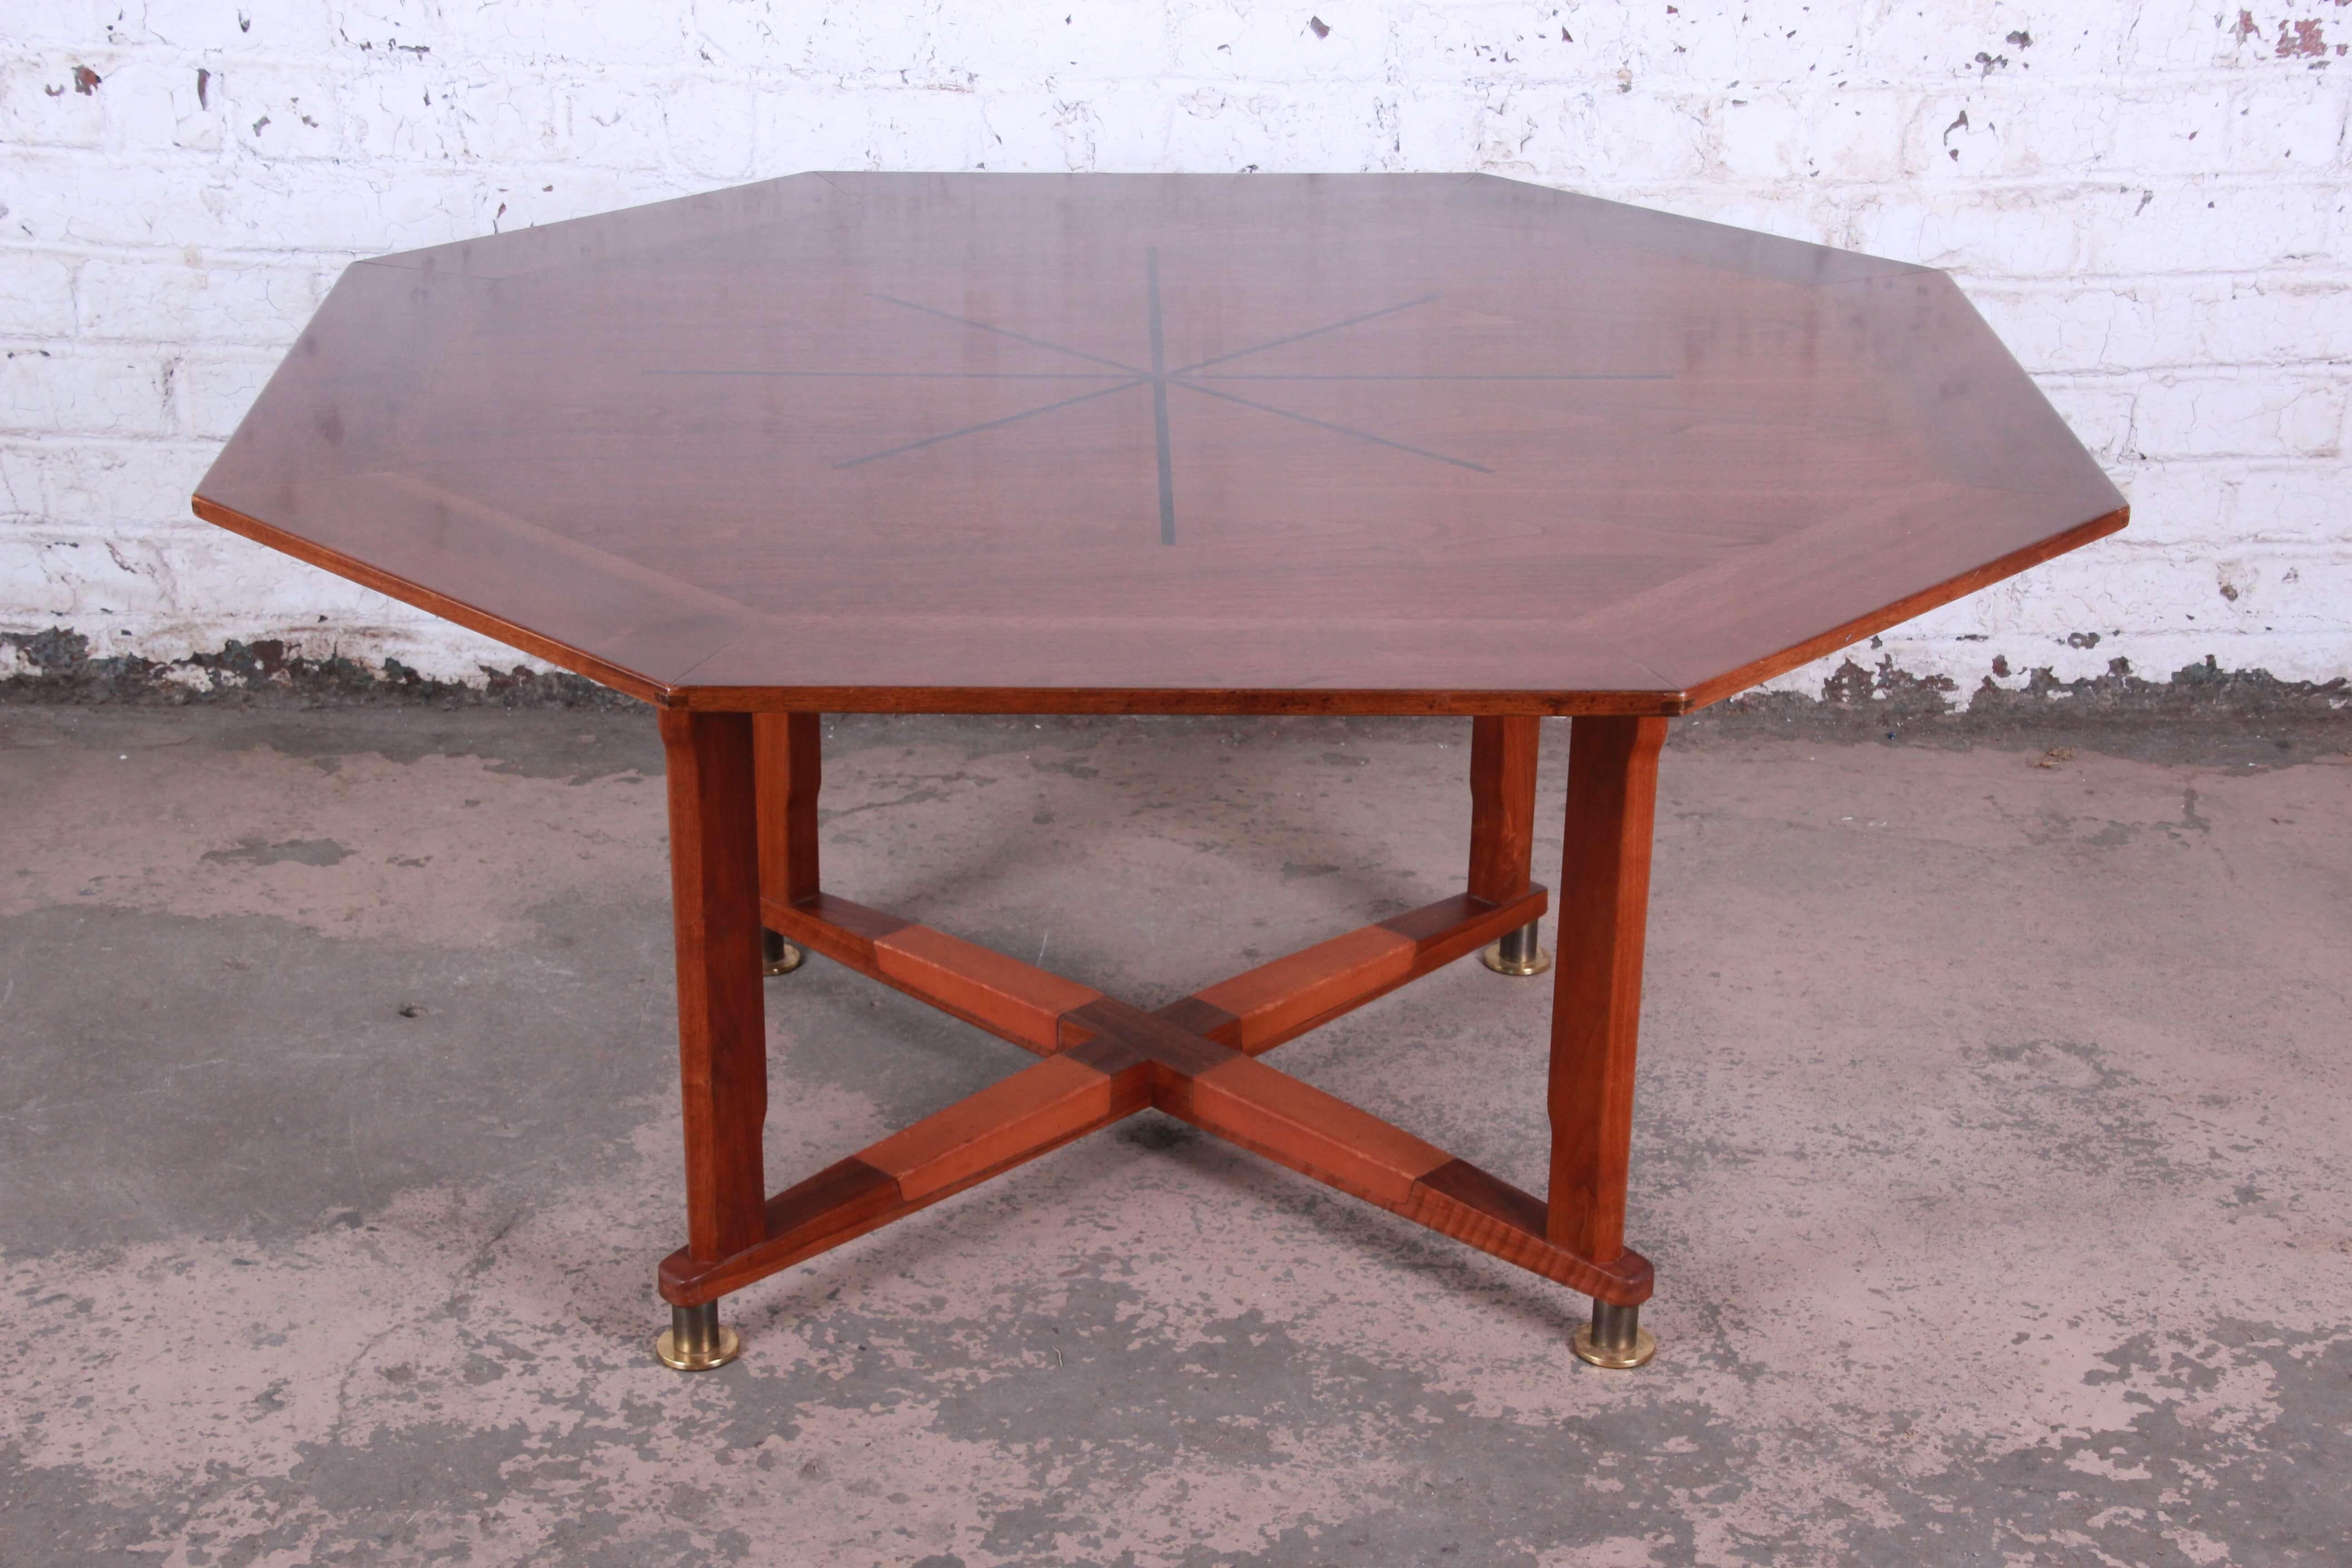 Offering an excellent Edward Wormley for Dunbar Janus collection game table or lower dining table. This octagonal table features an inlaid rosewood starburst with beautiful walnut wood grain and exposed tenon joinery. The base sits on brass feet